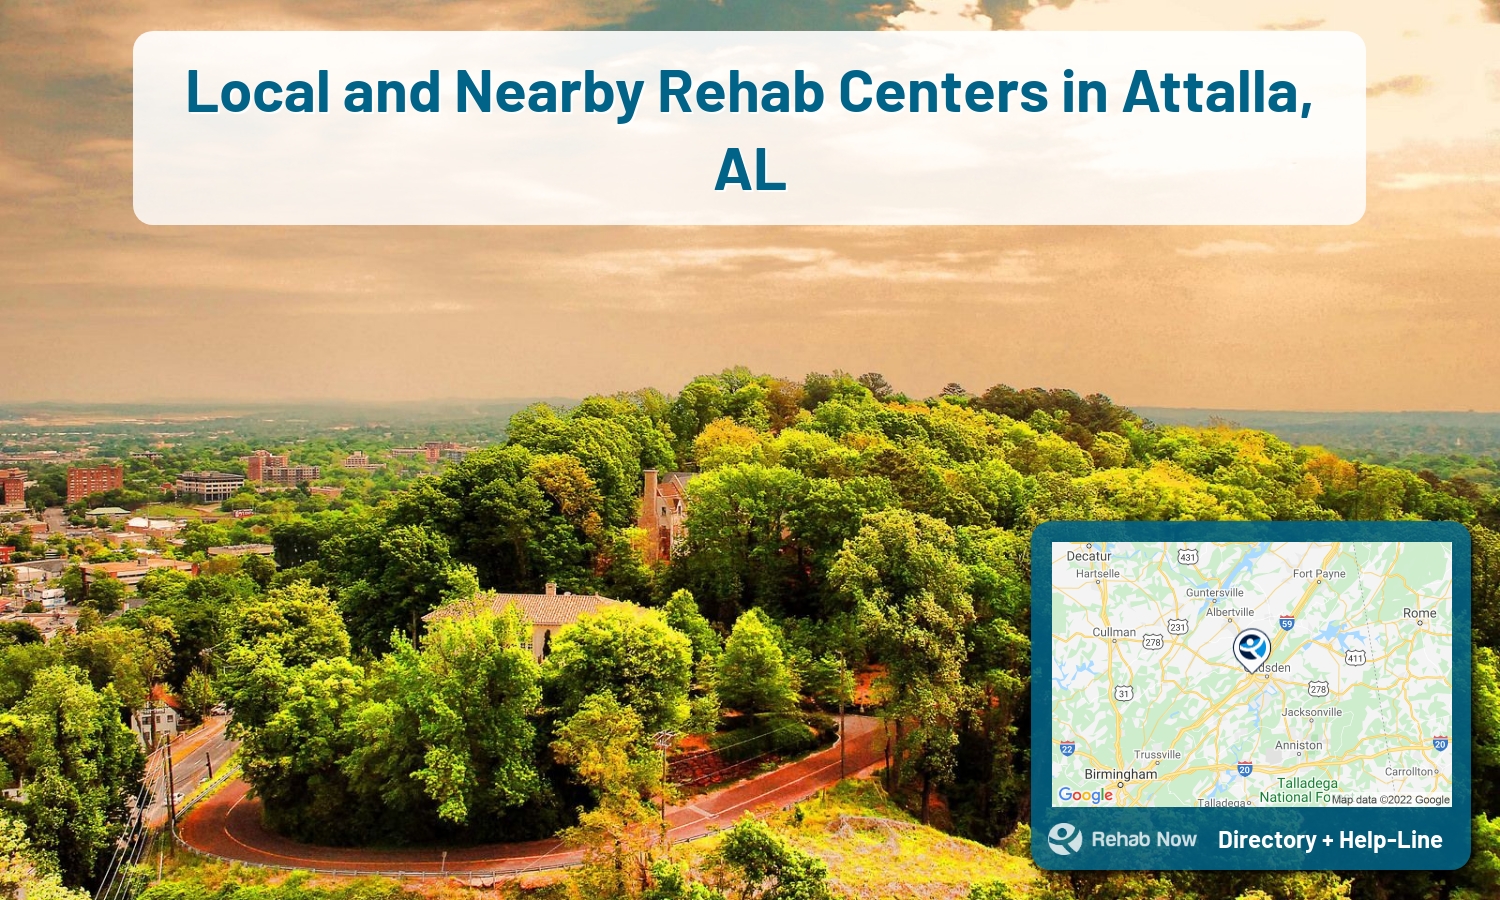 Let our expert counselors help find the best addiction treatment in Attalla, Alabama now with a free call to our hotline.